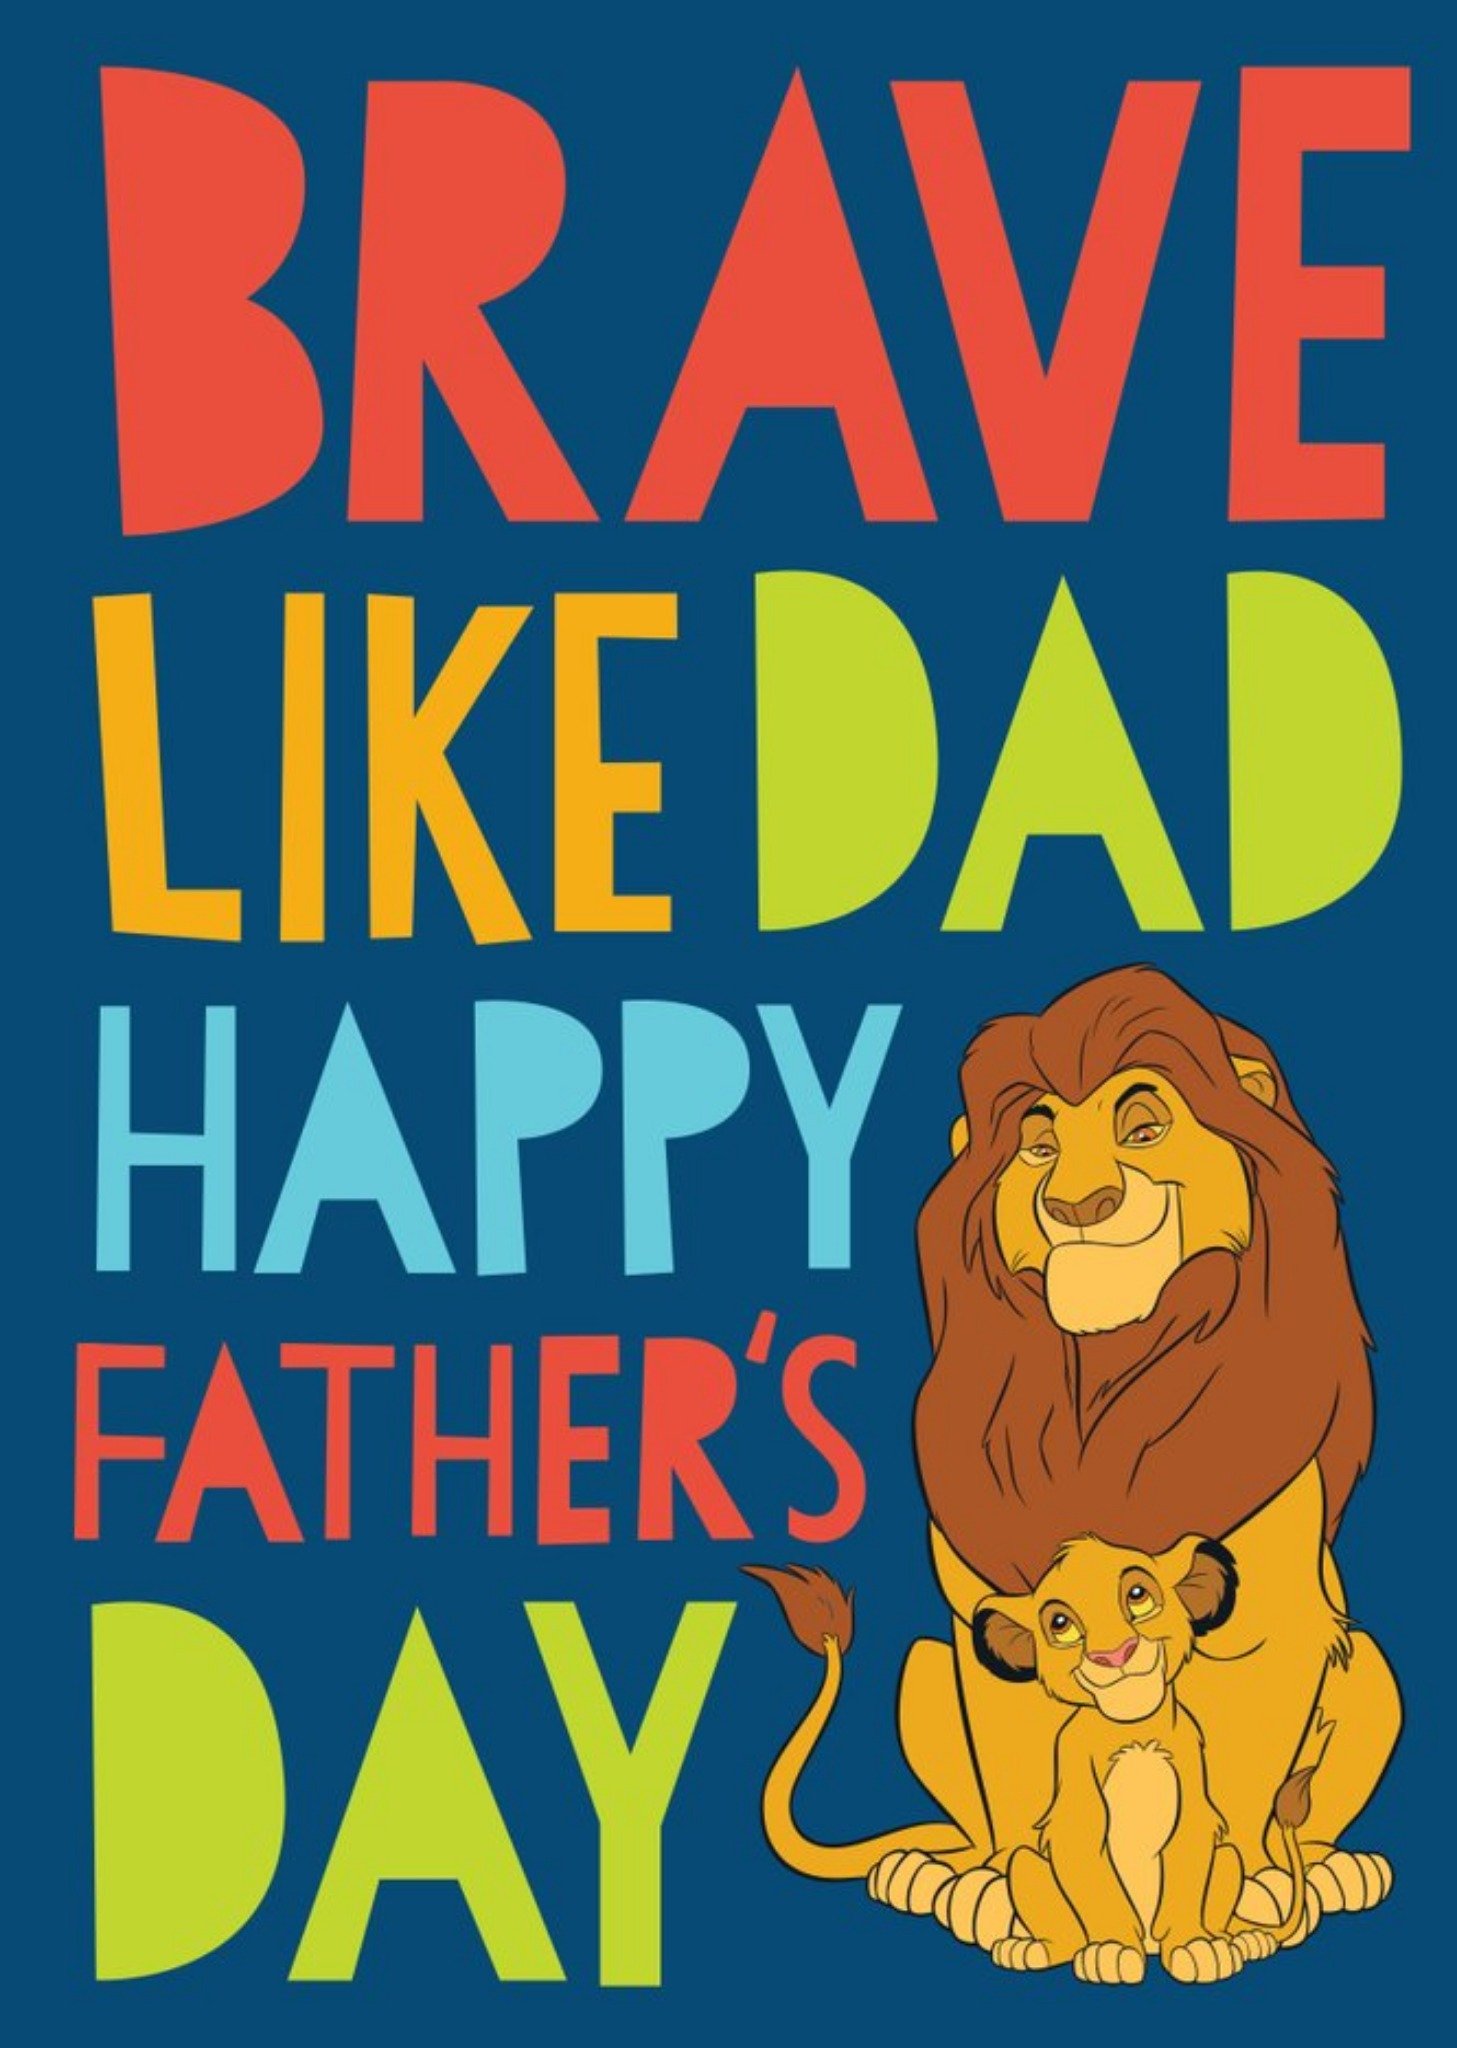 Disney The Lion King Brave Like Dad Father's Day Card Ecard